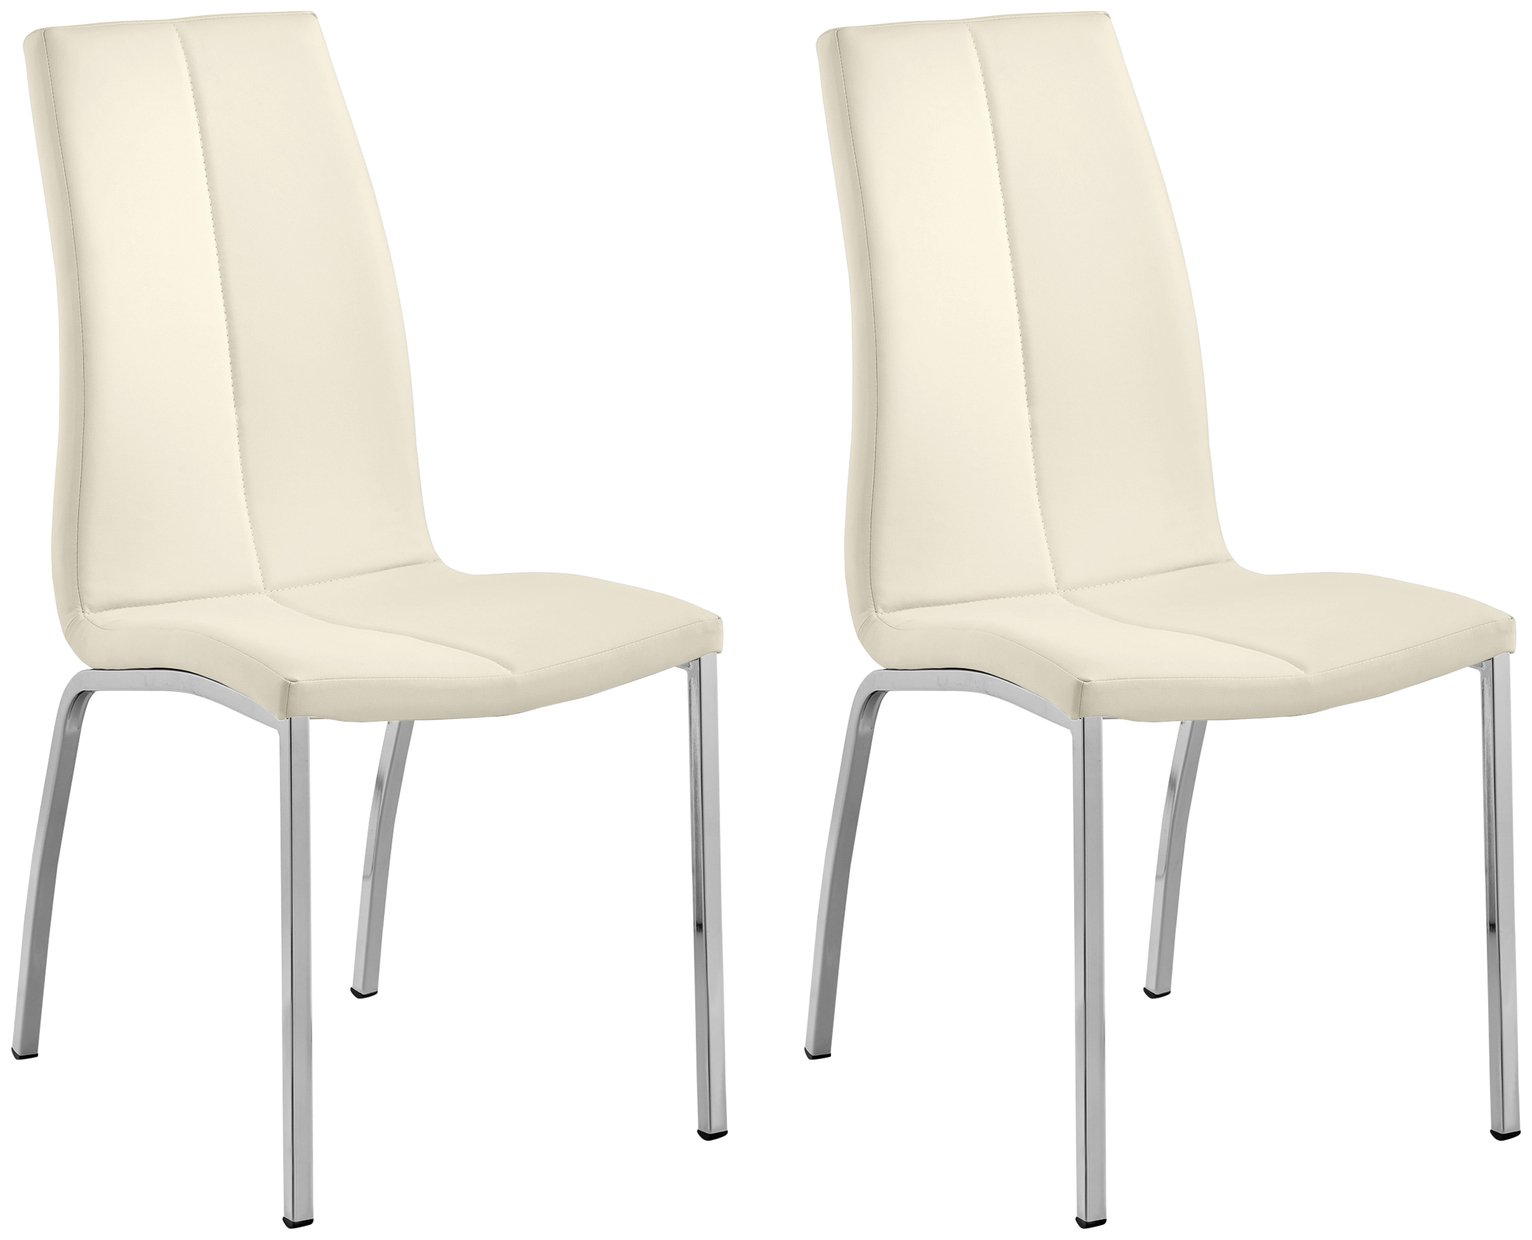 Argos Home Milo Pair of Curve Back Chairs - Ivory